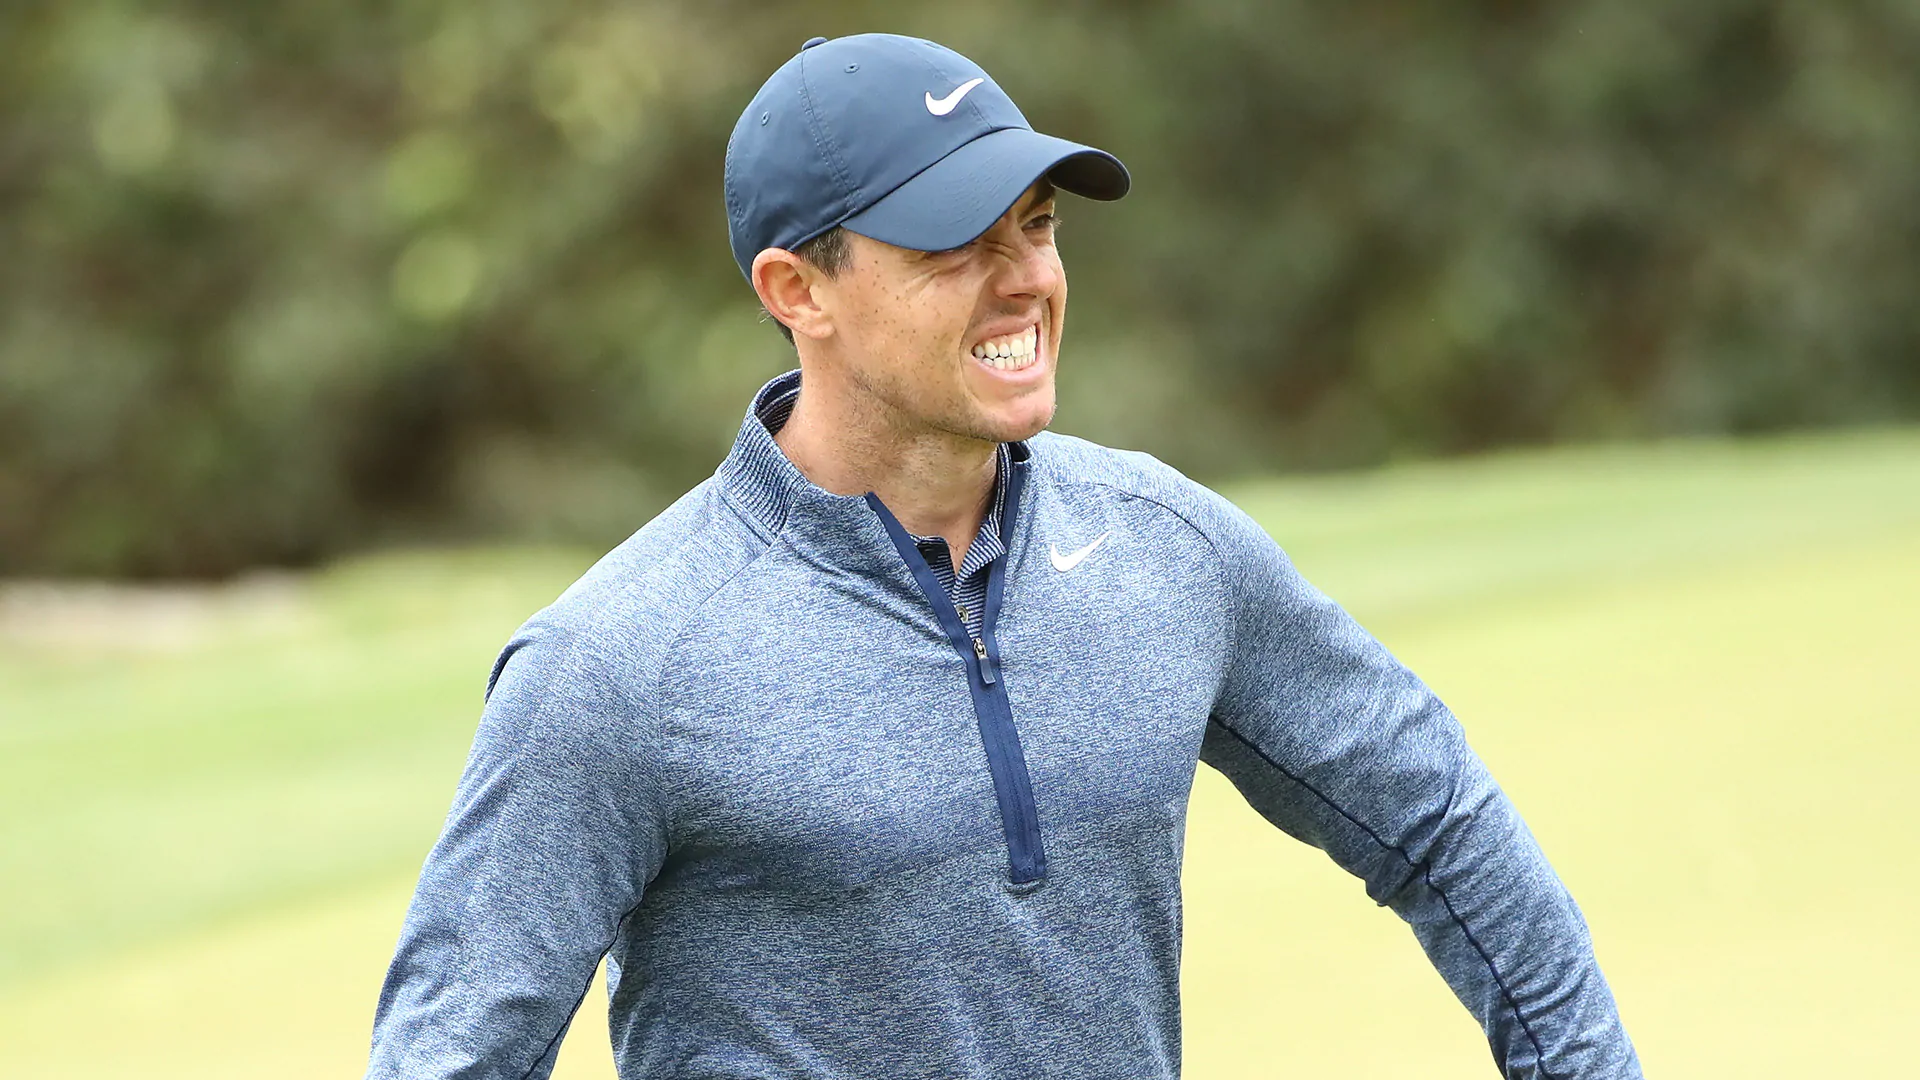 McIlroy apologizes for declining media: See you at Augusta